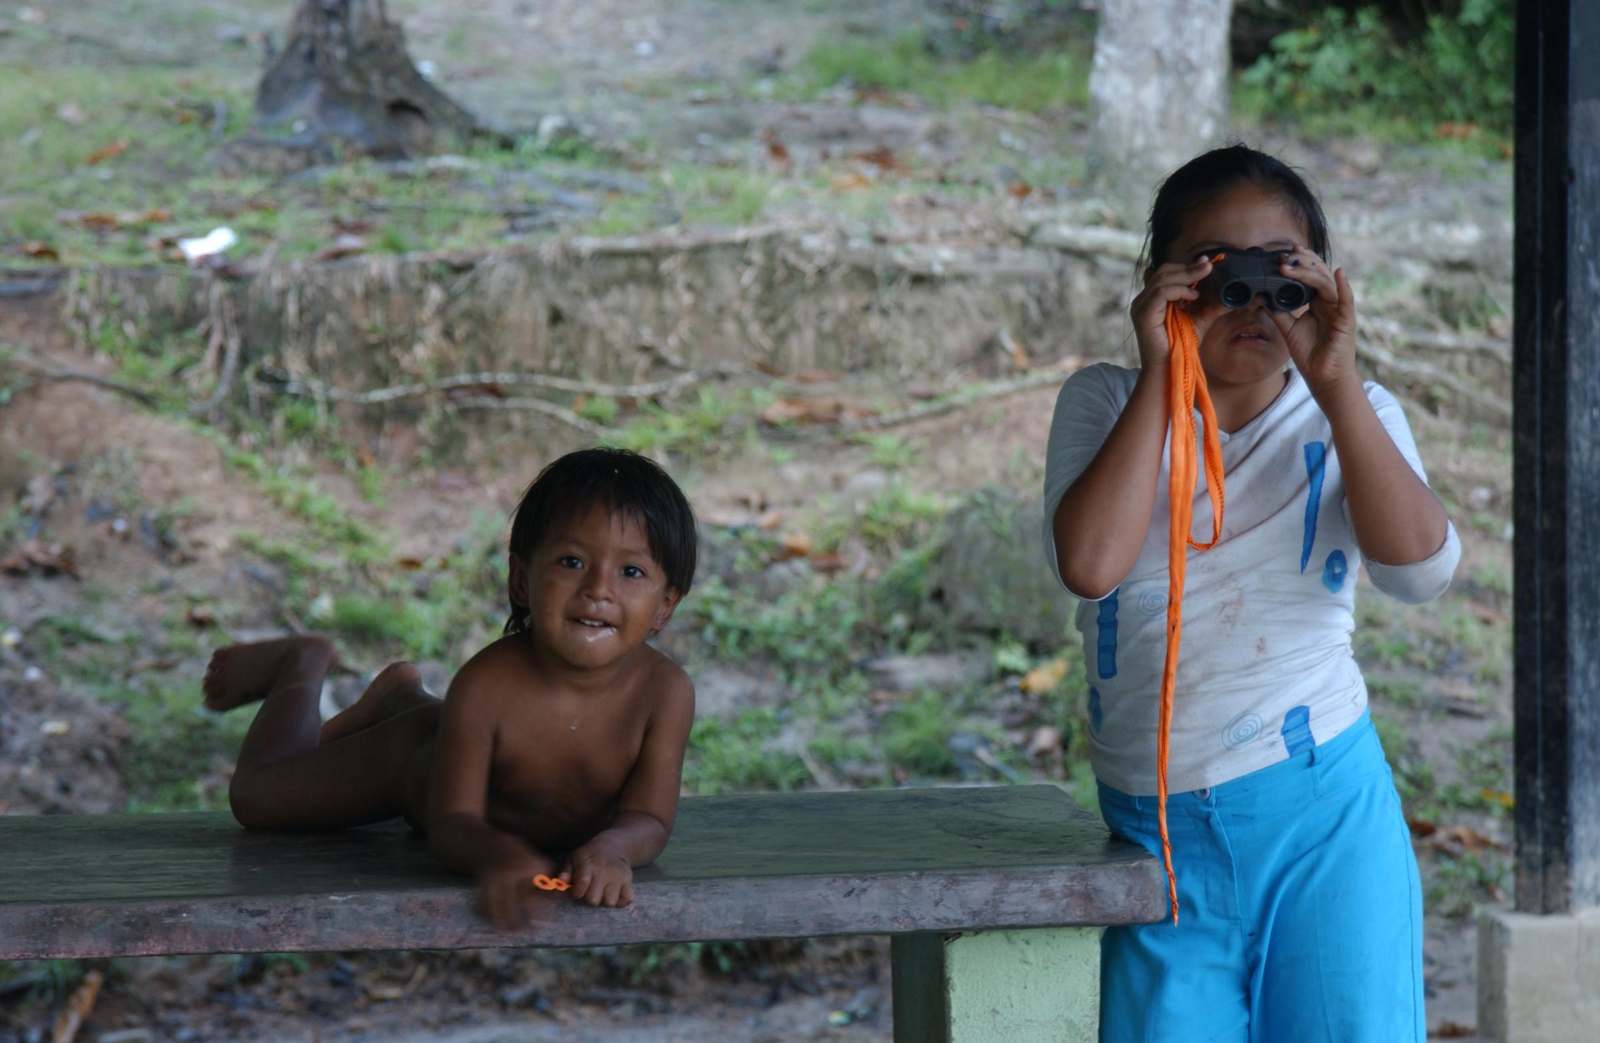 a girl looking through binoculars while a boy lying on a bench